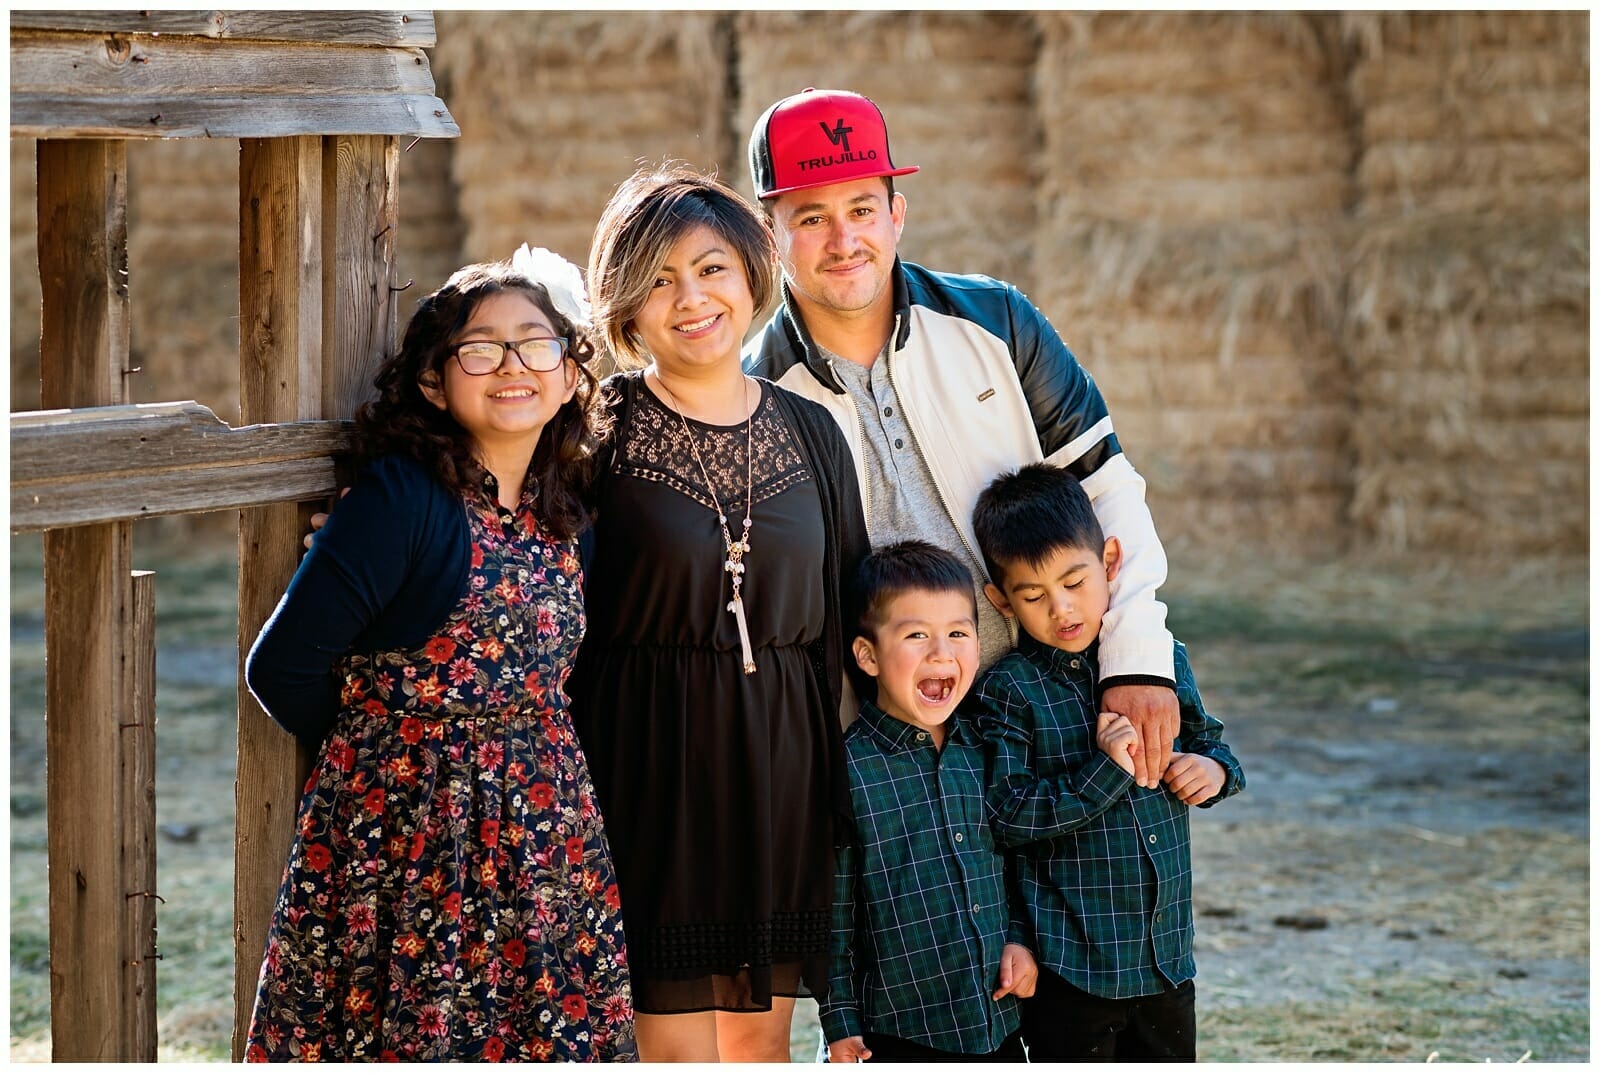 Idahope photography family by a barn and haystack